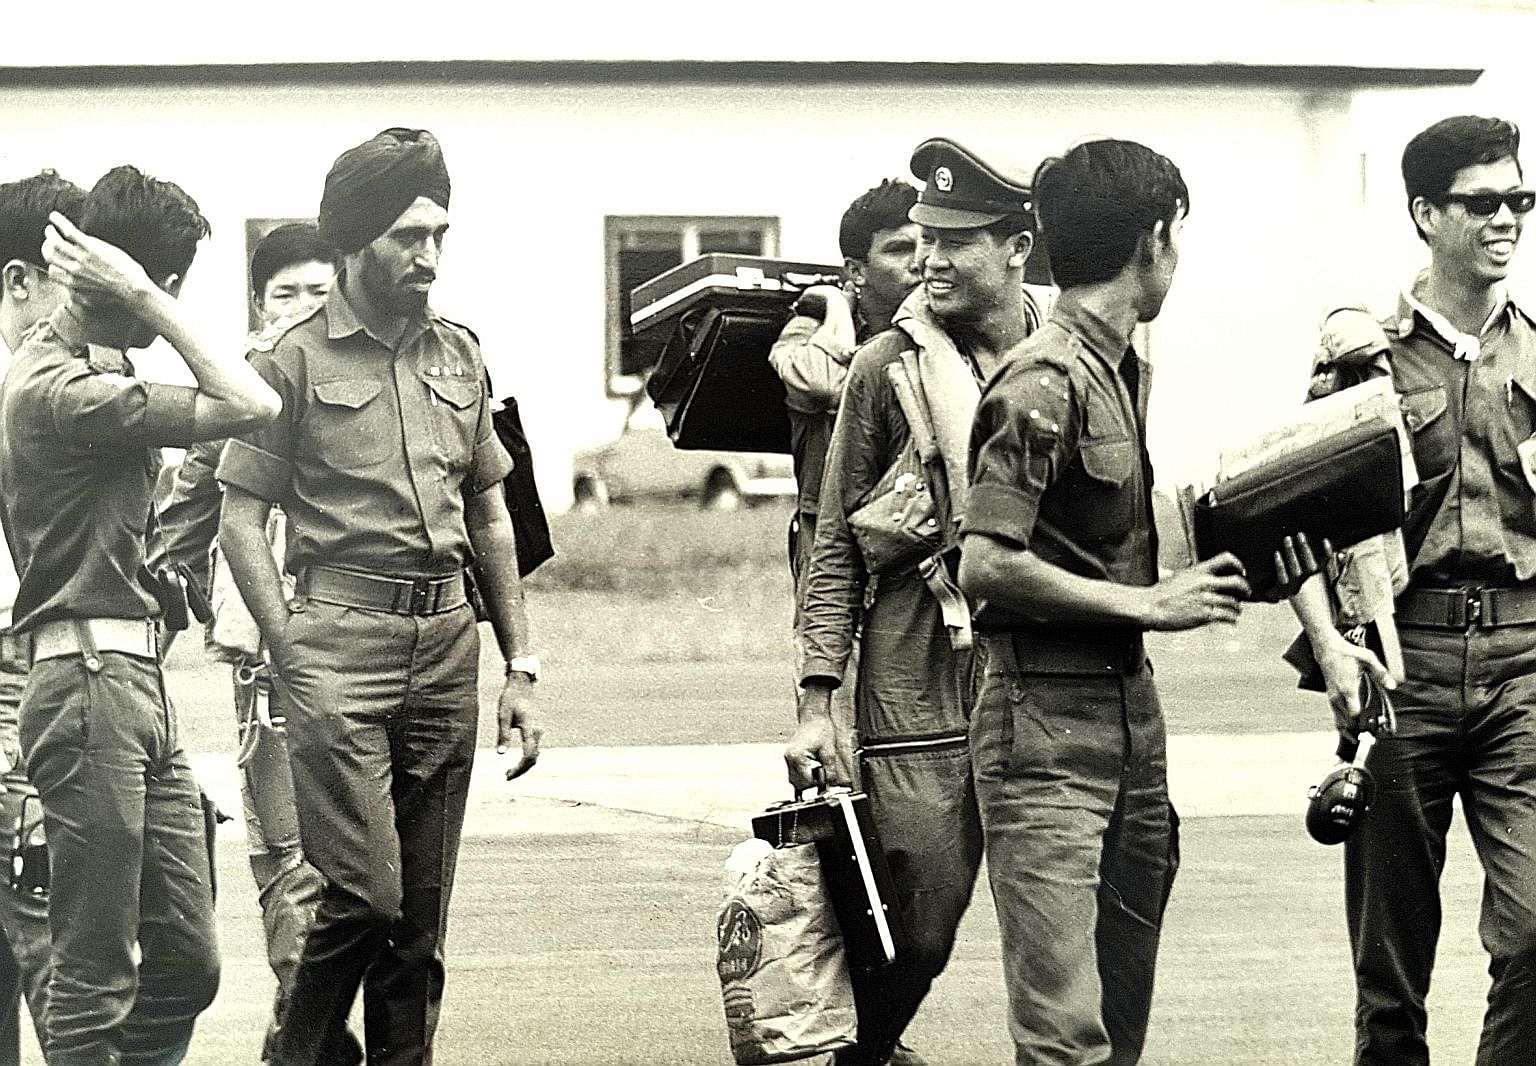 LT Leo Tin Boon (third from right), then a 21-year-old helicopter pilot, back in Singapore with the rest of the Kuantan detachment in 1971. It was the RSAF's - then the Singapore Air Defence Command - first humanitarian assistance and disaster relief